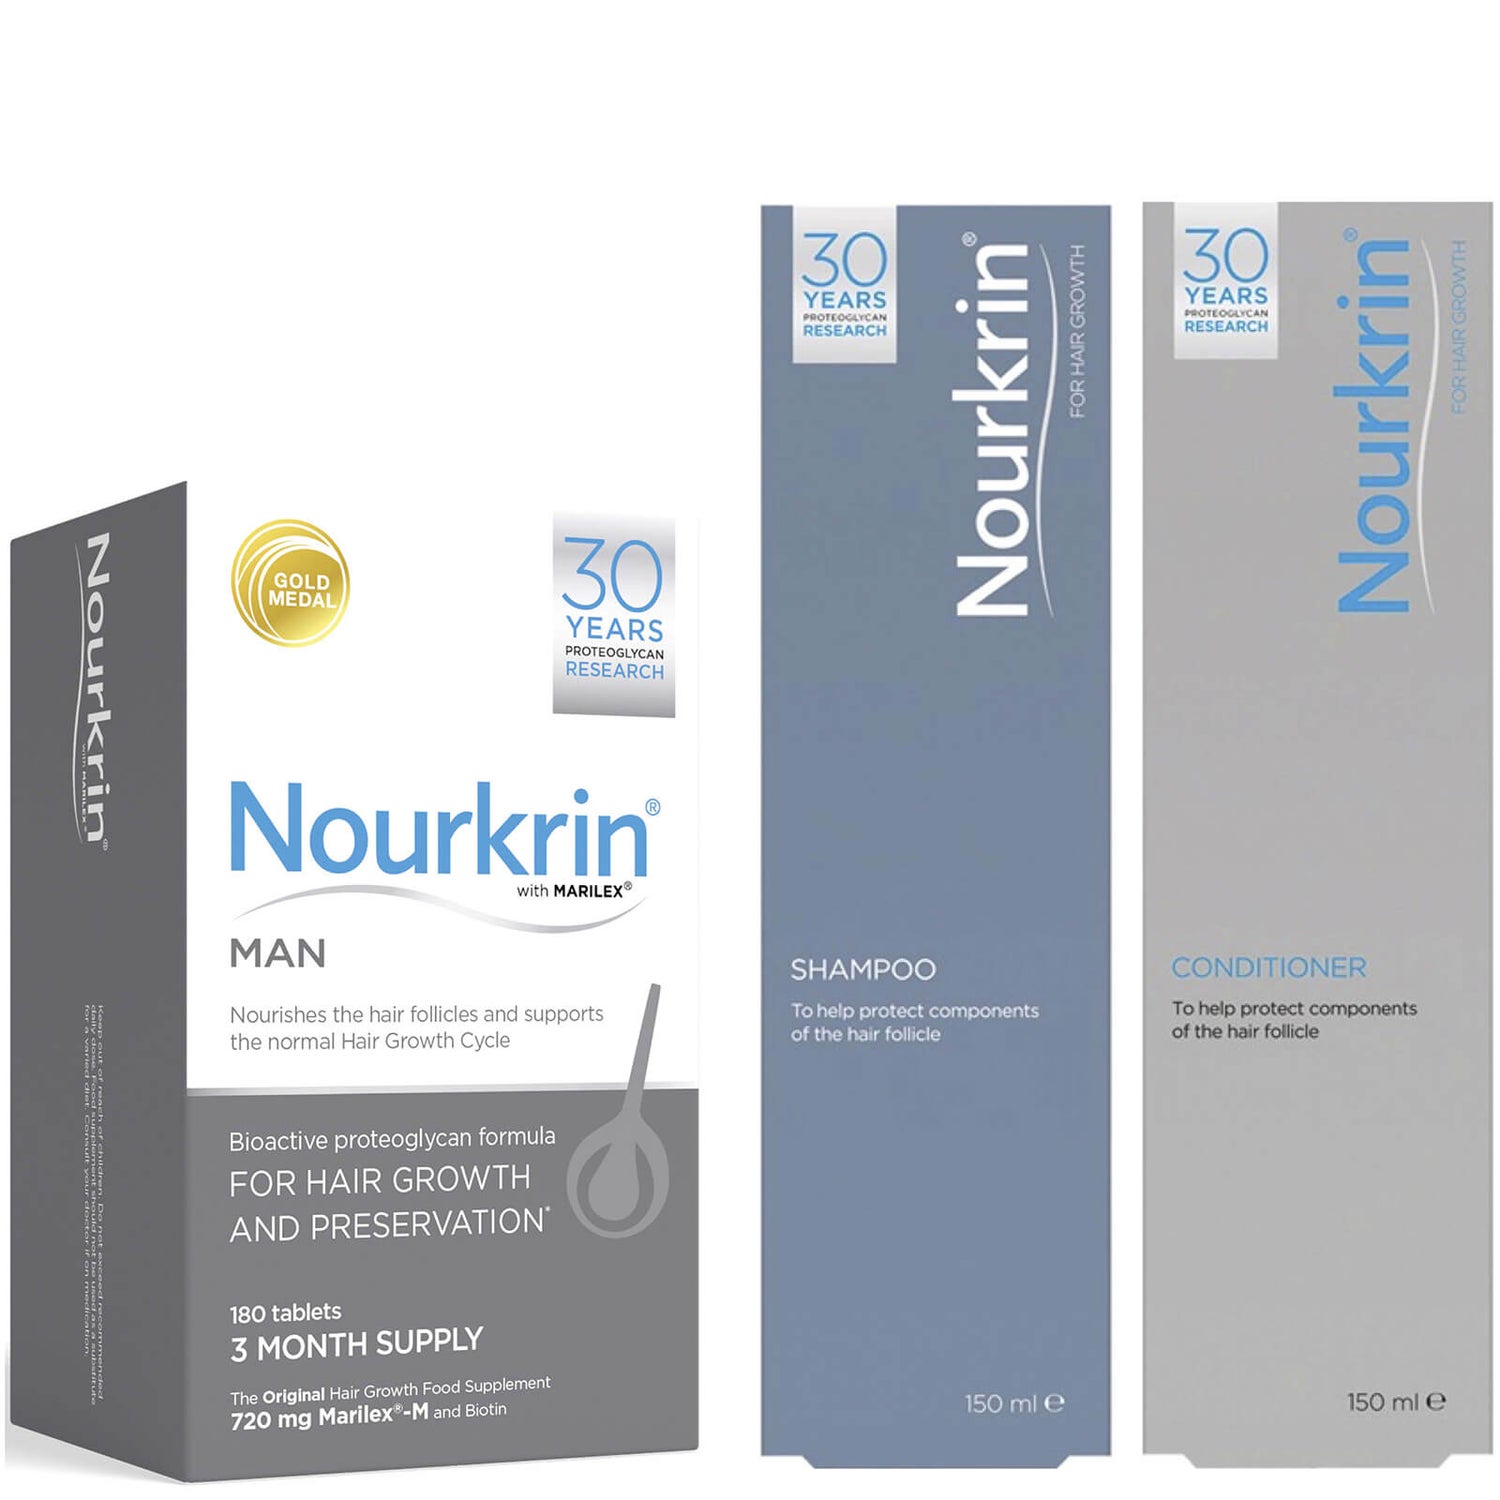 Nourkrin Man Value Pack - Contains 180 Tablets Plus Shampoo and Conditioner (2x150ml)